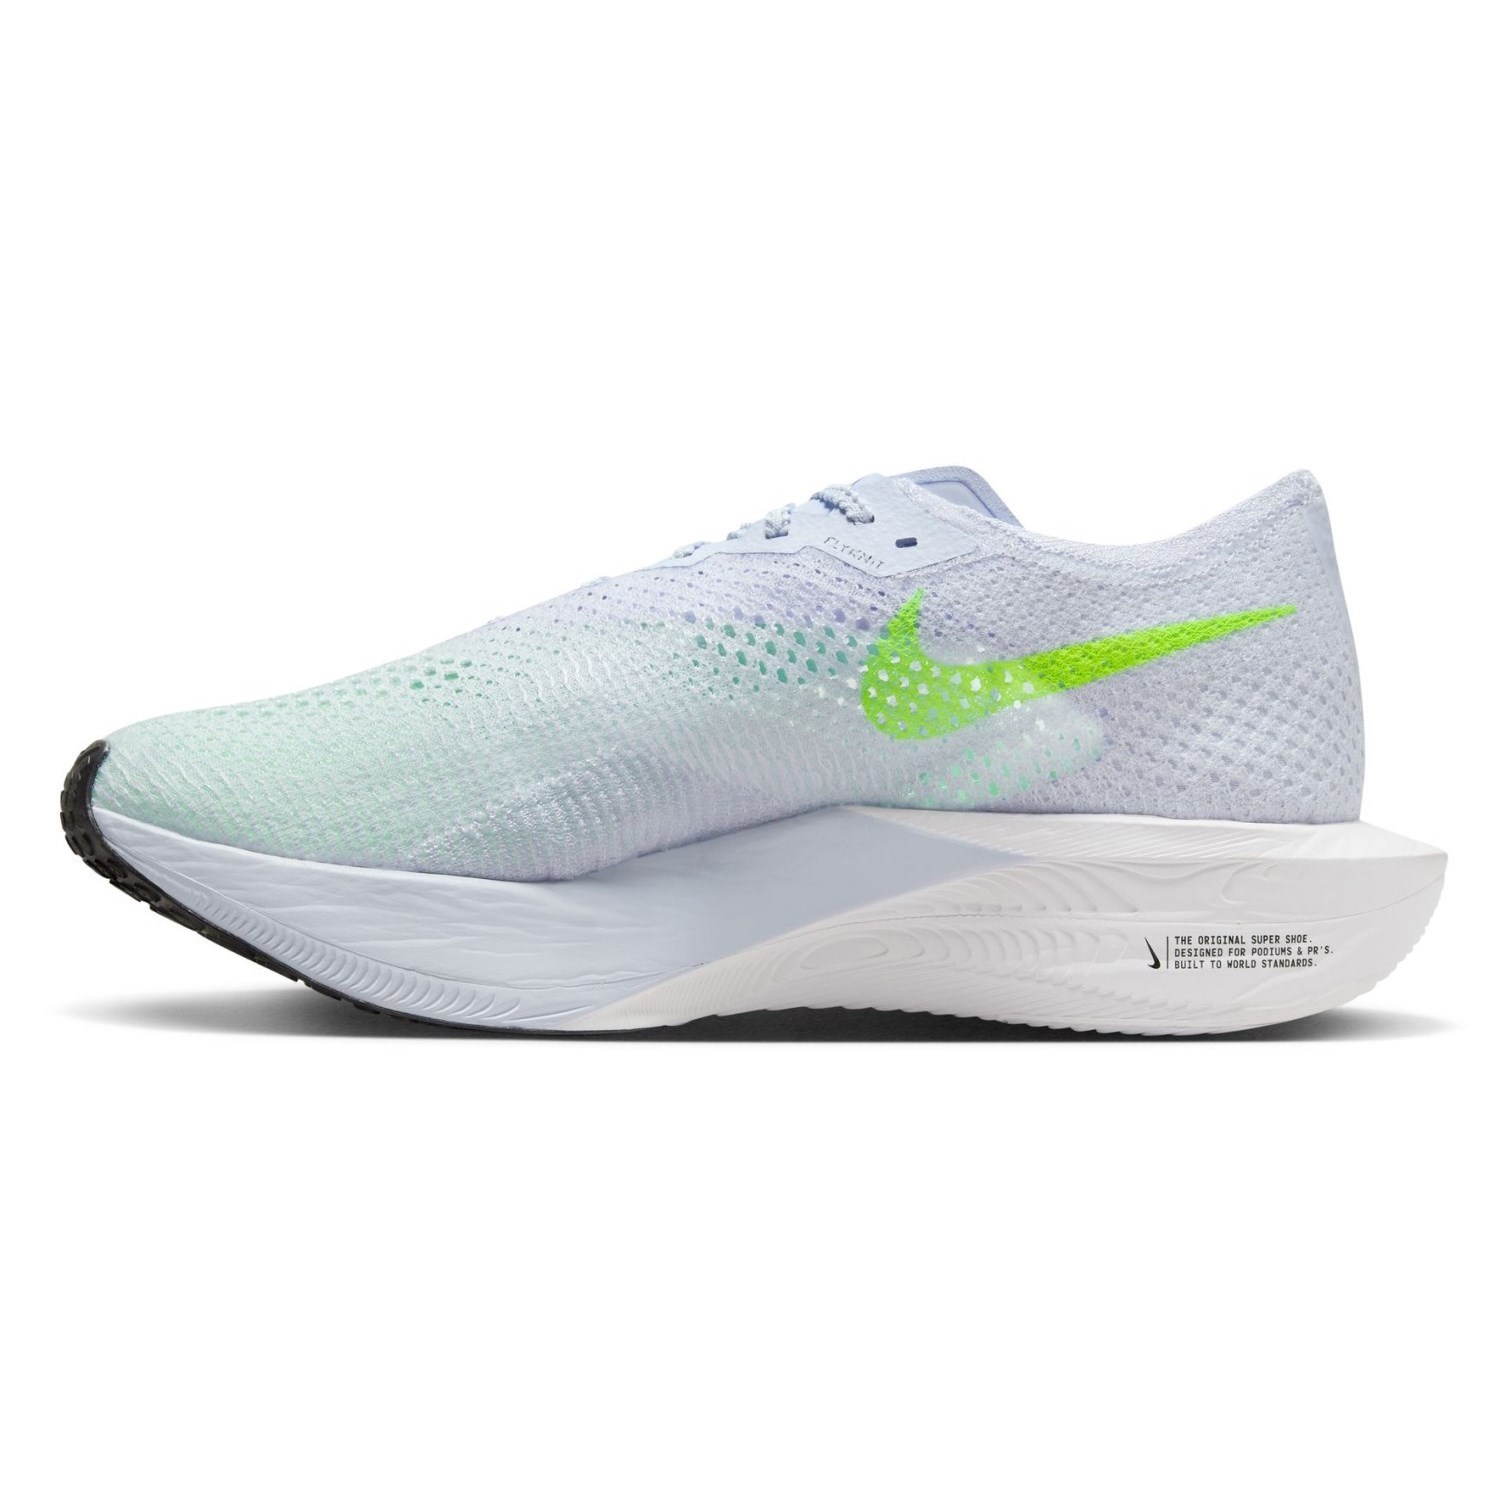 Nike ZoomX Vaporfly Next% 3 - Mens Road Racing Shoes - Football Grey ...